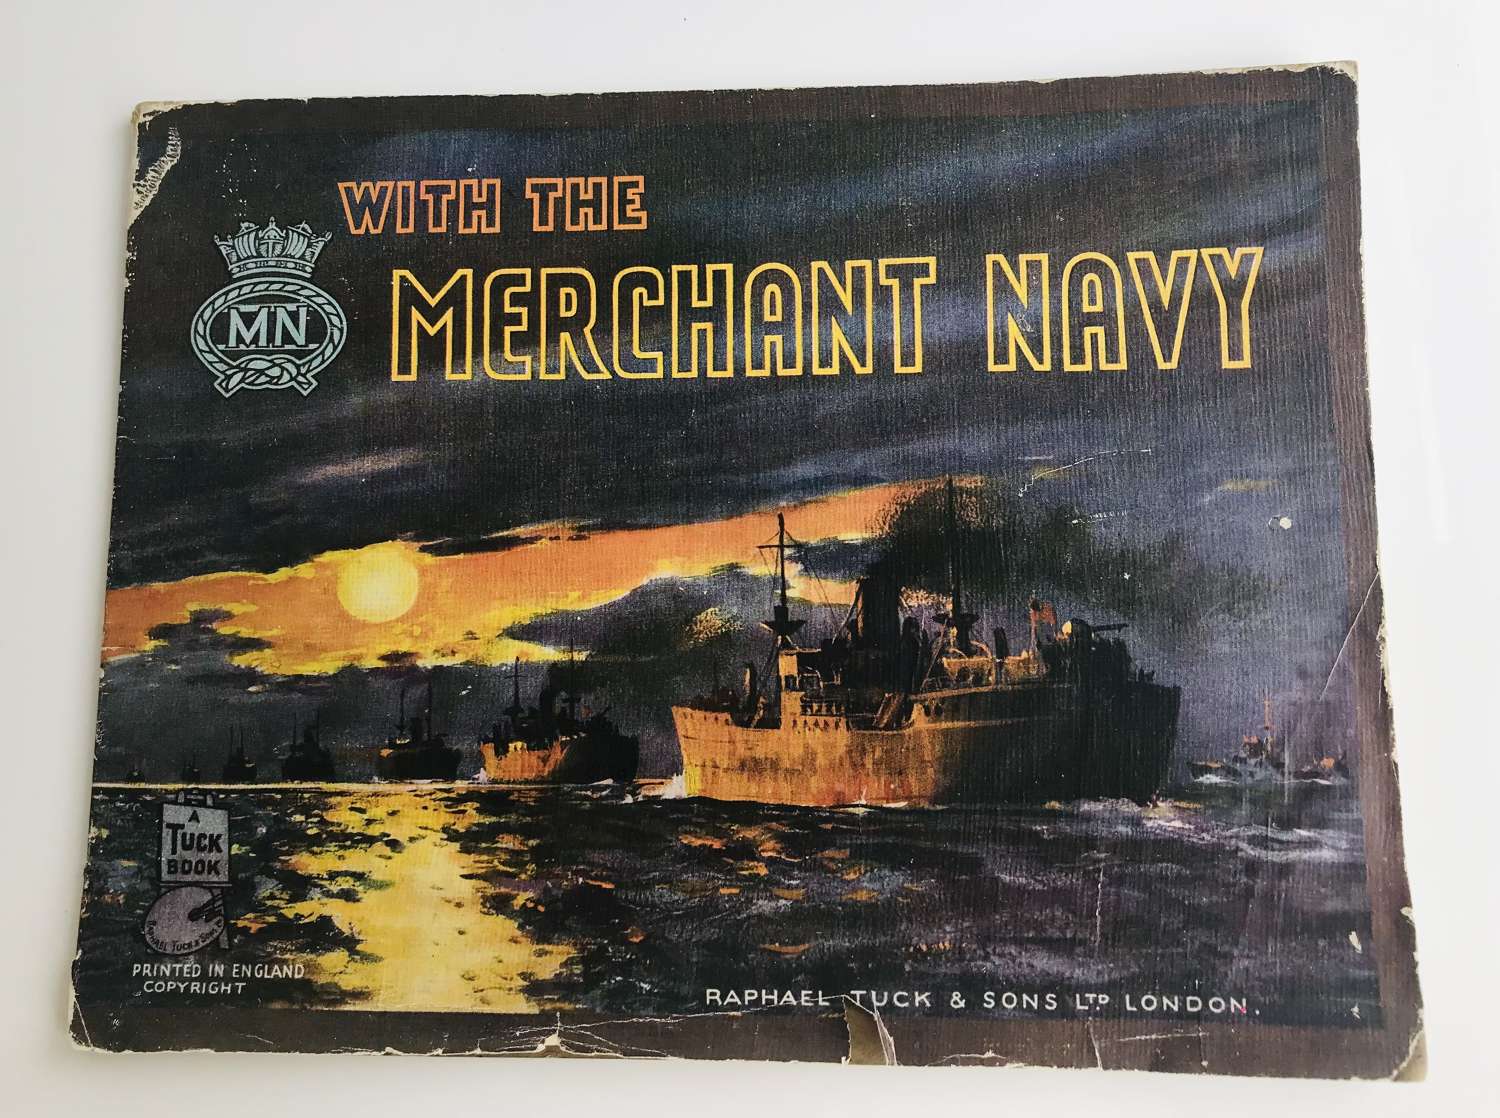 A copy of (with the merchant Navy) published, 1942